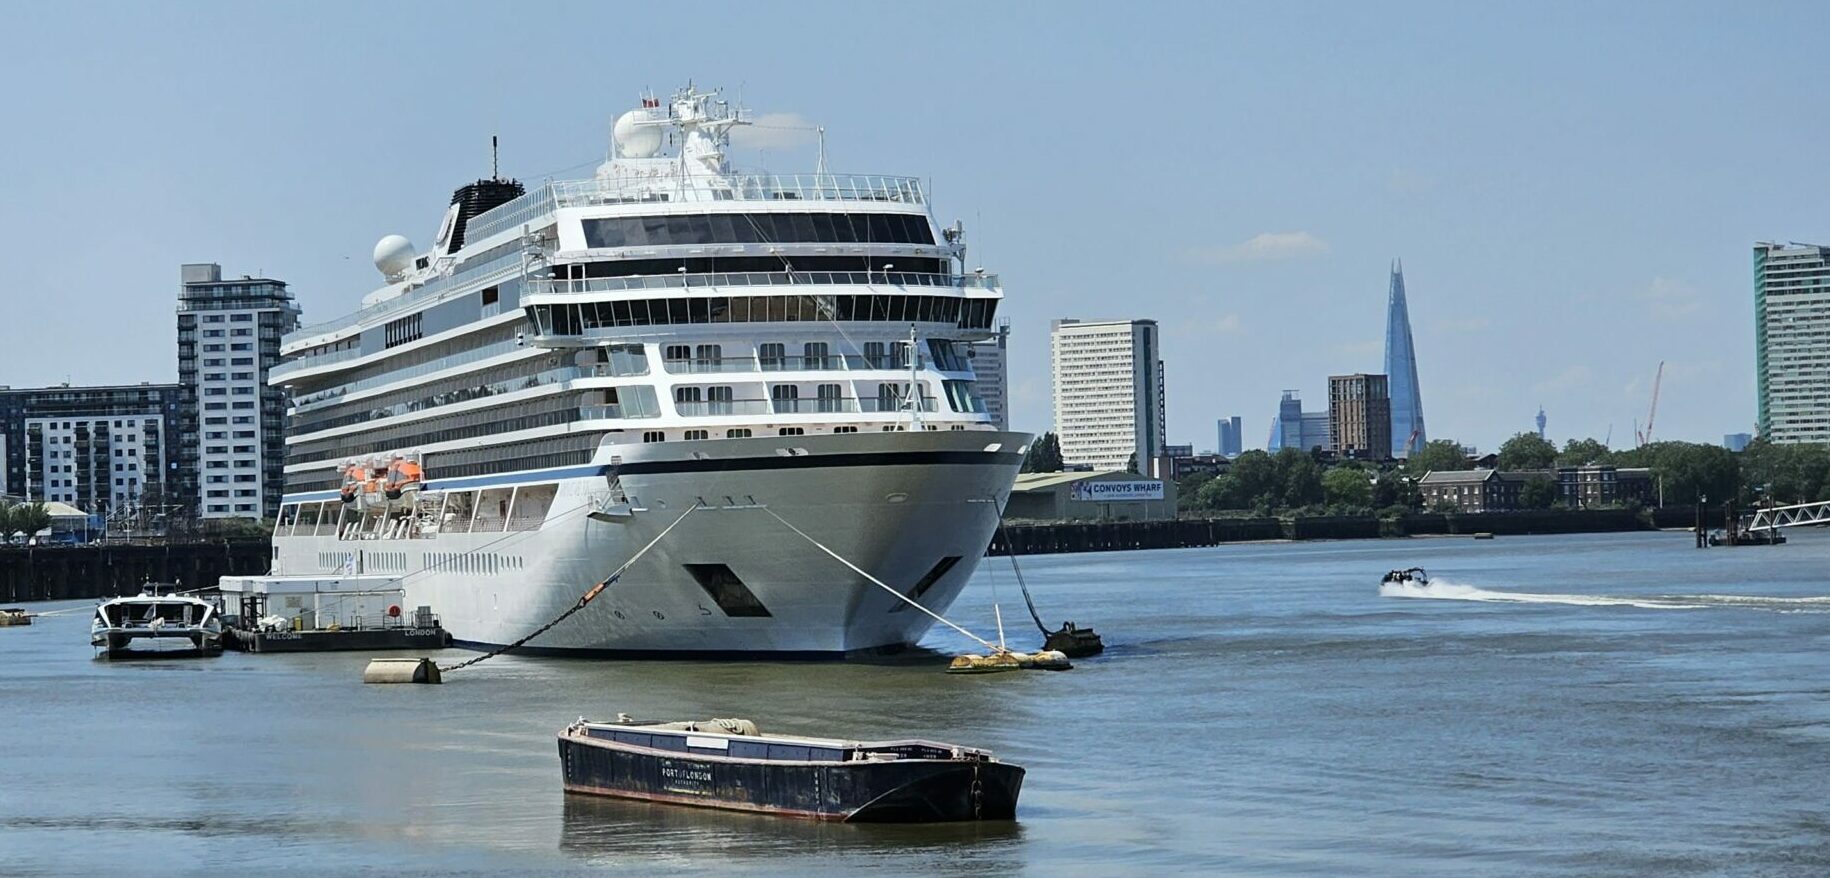 A lecturer may discuss the Viking cruise ship docked on the River Thames.